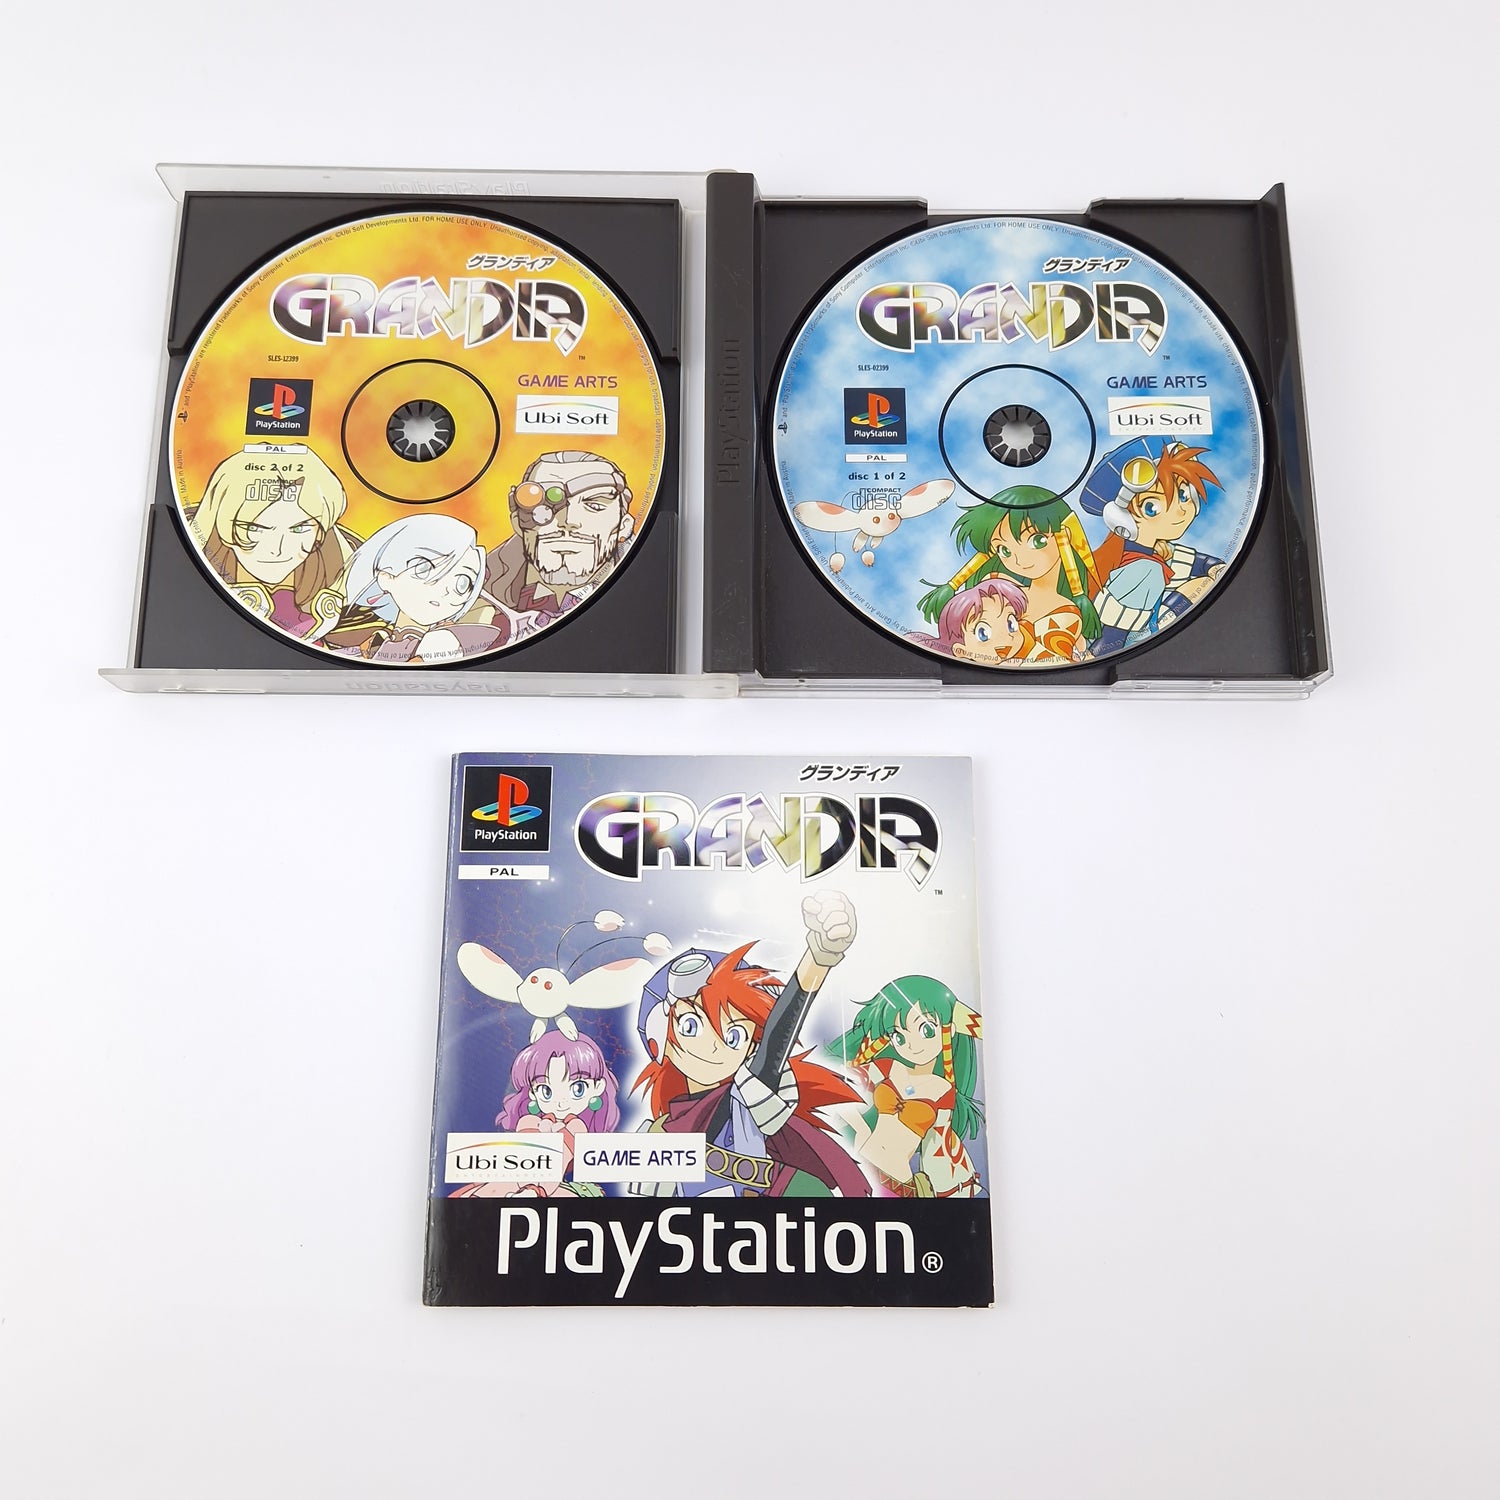 Sony Playstation 1 Spiel : Grandia - OVP Anleitung CD - PS1 PSX PAL Game